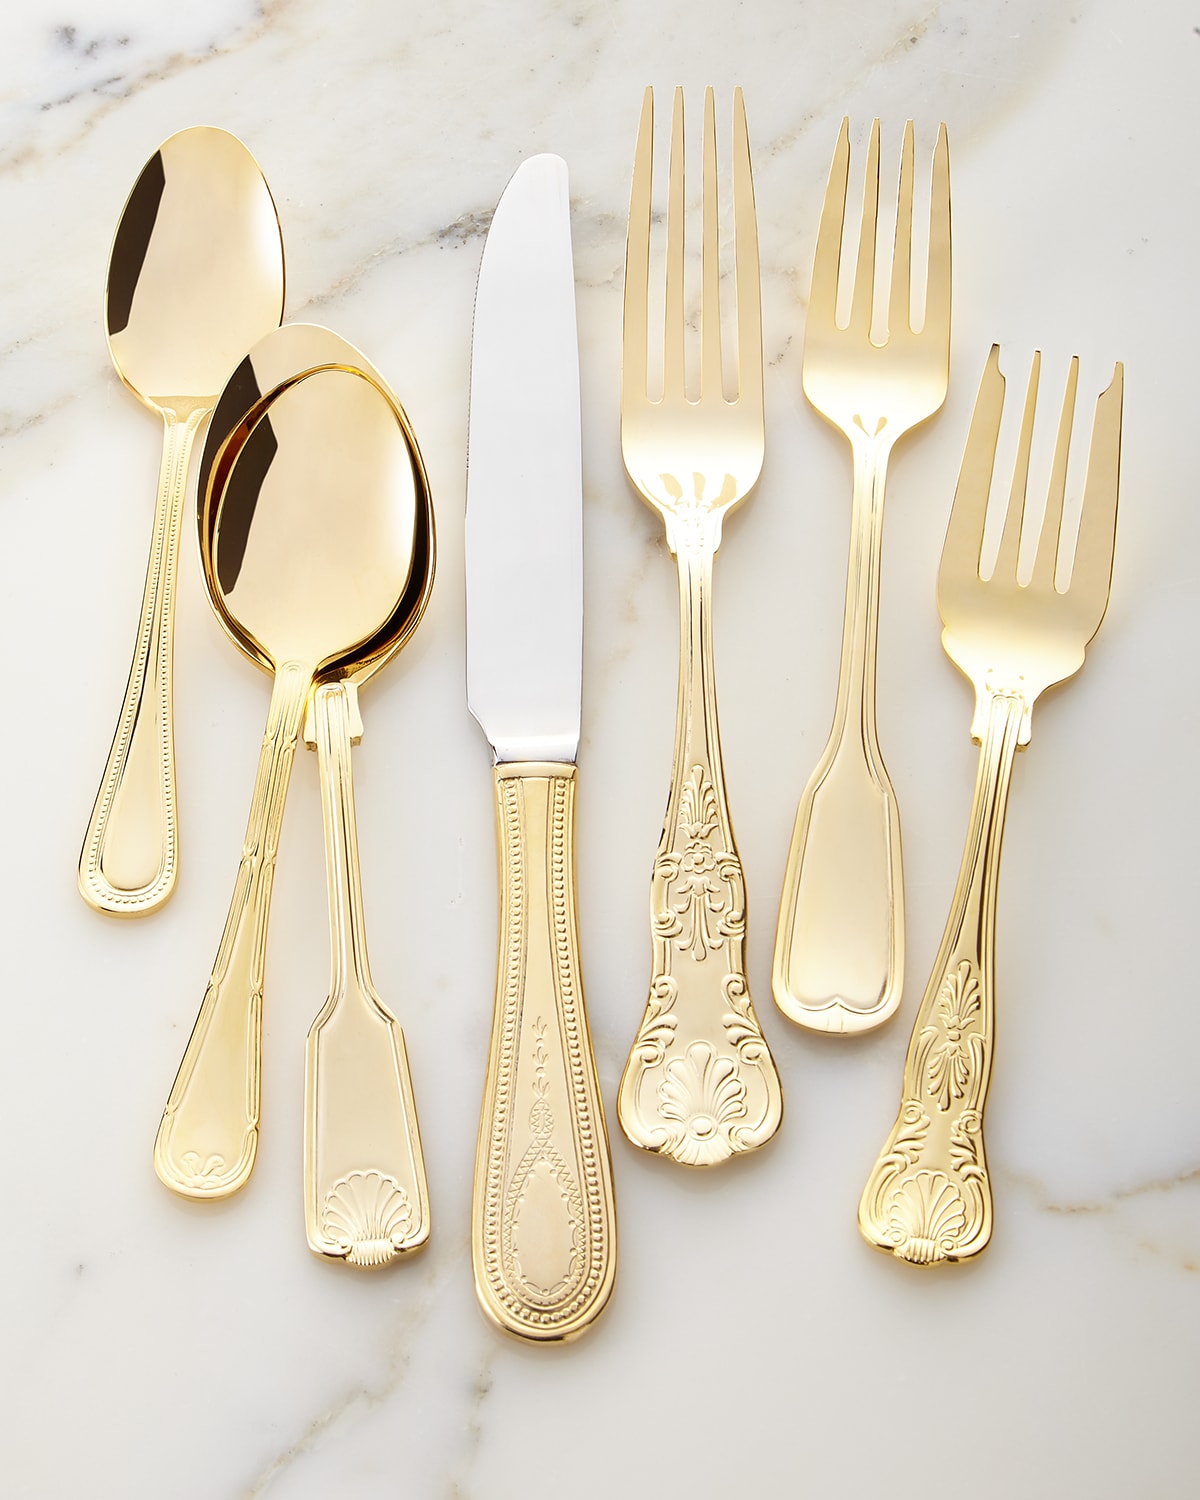 Towle Silversmiths 90-piece Gold-plated Hotel Flatware Service